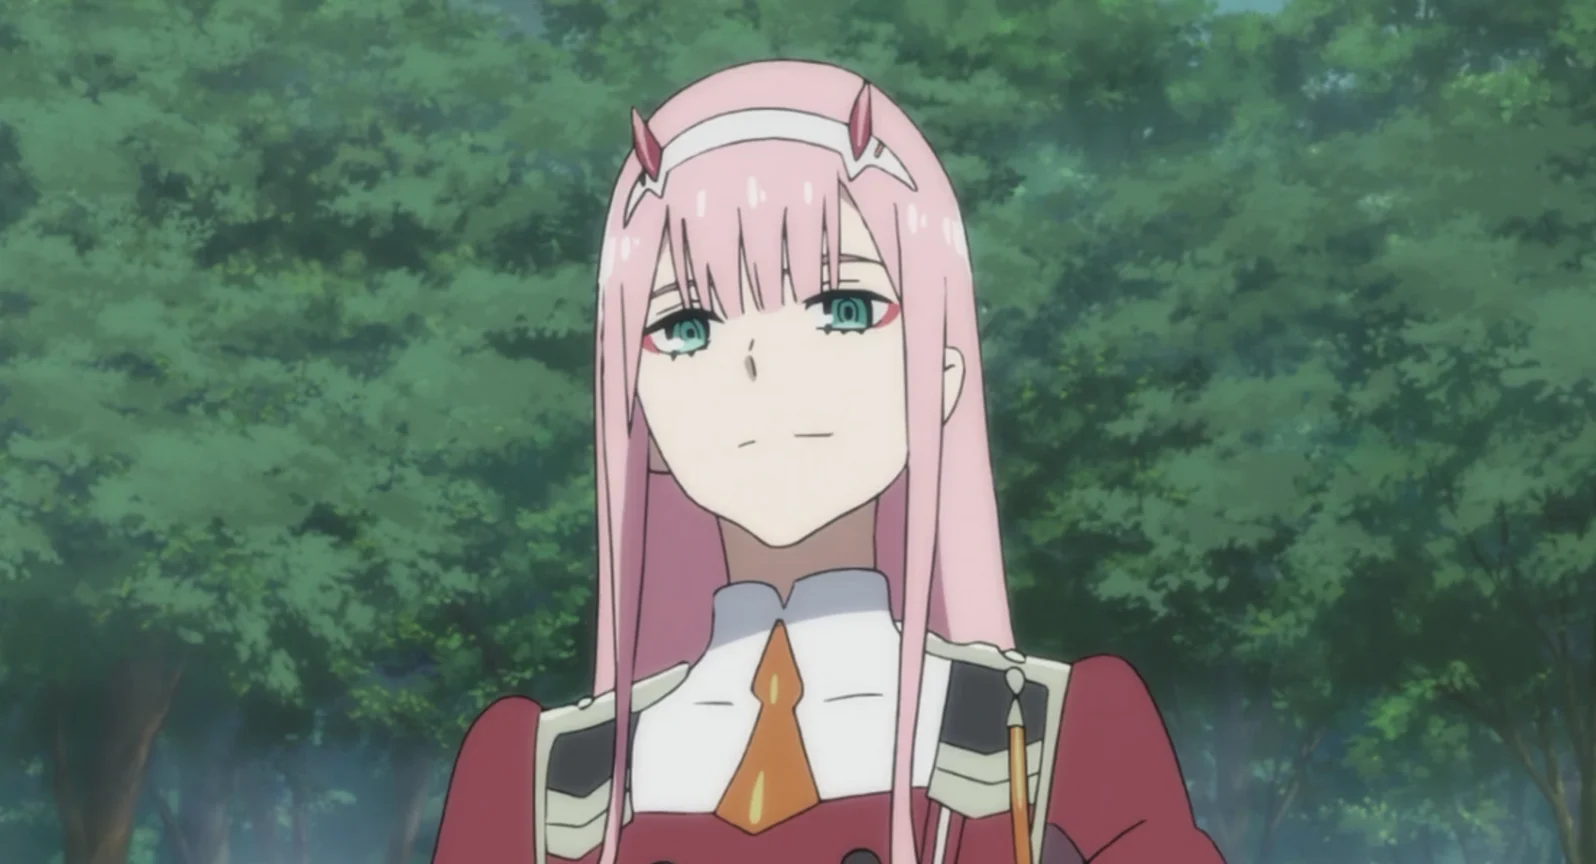 Zero from Darling In The Franxx is one of the most endearing waifu among fans